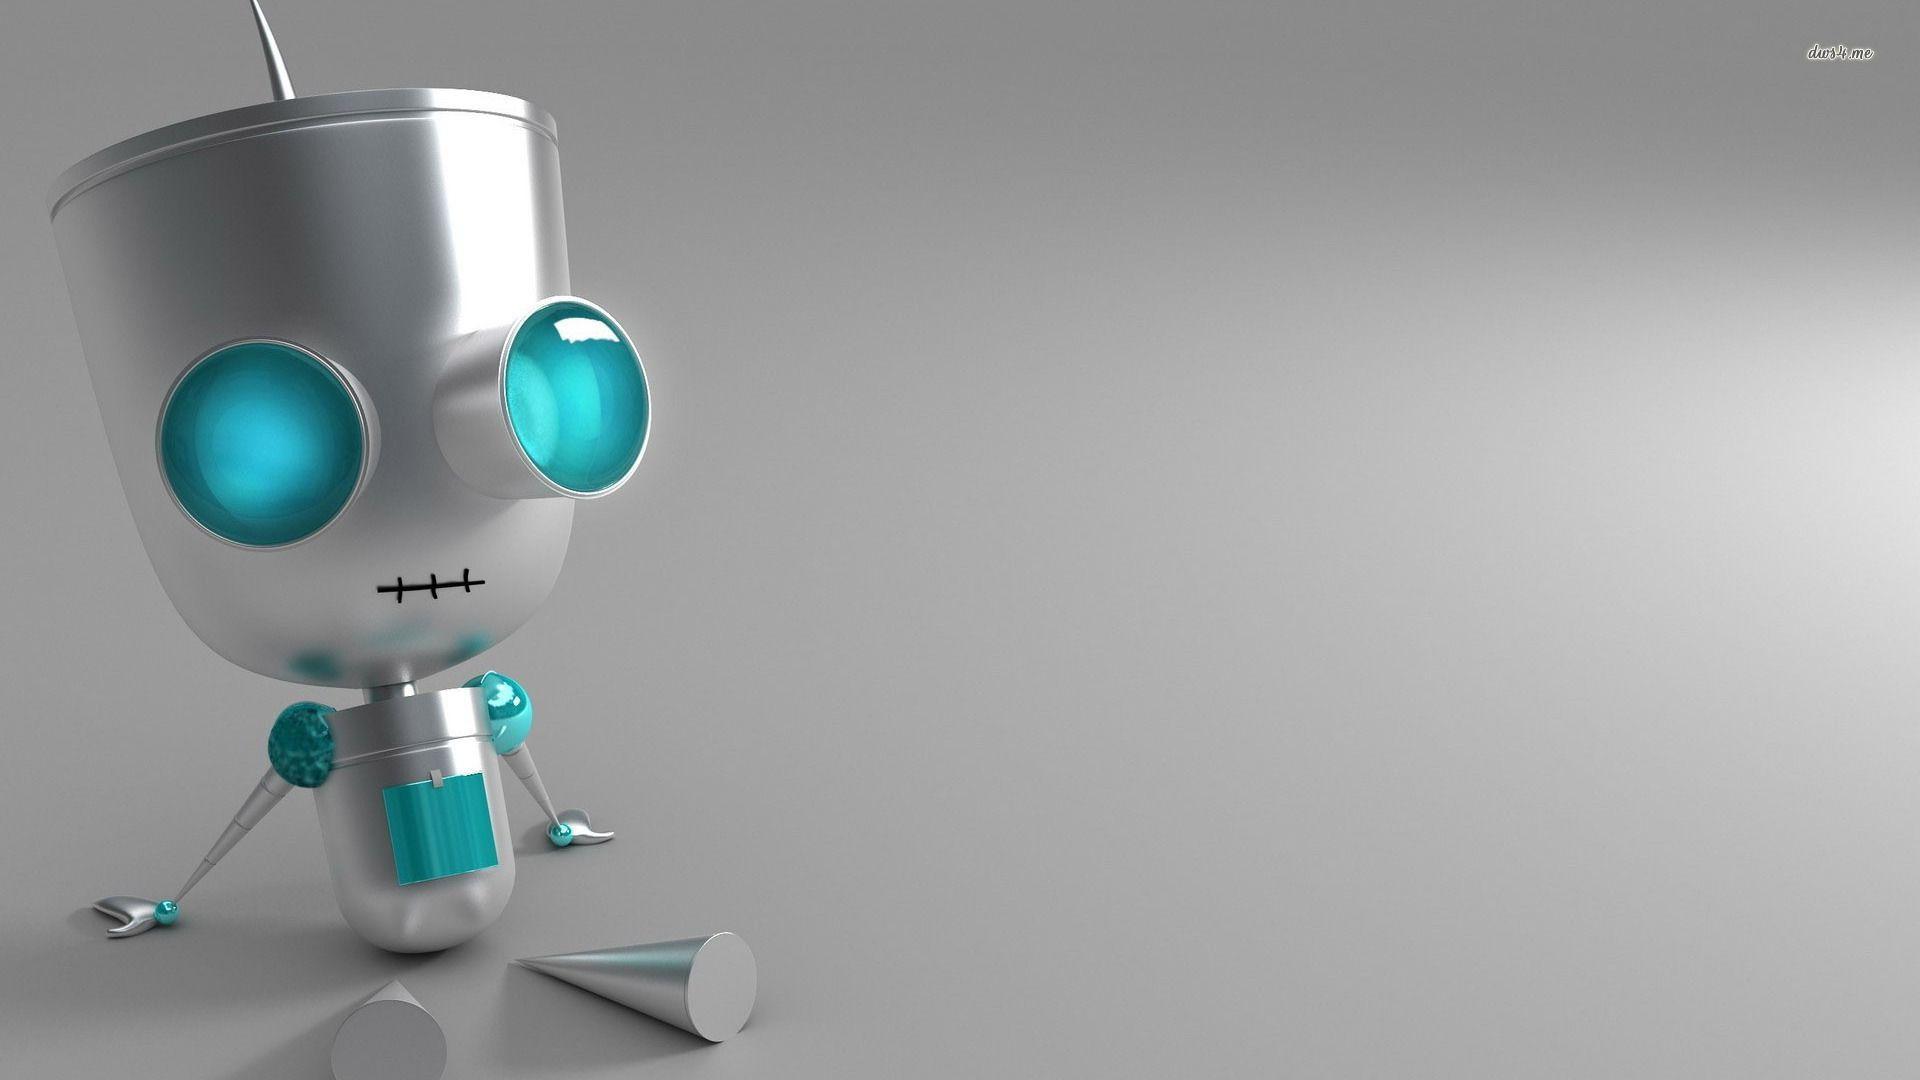 Awesome HD Robot Wallpaper & Background For Free Download